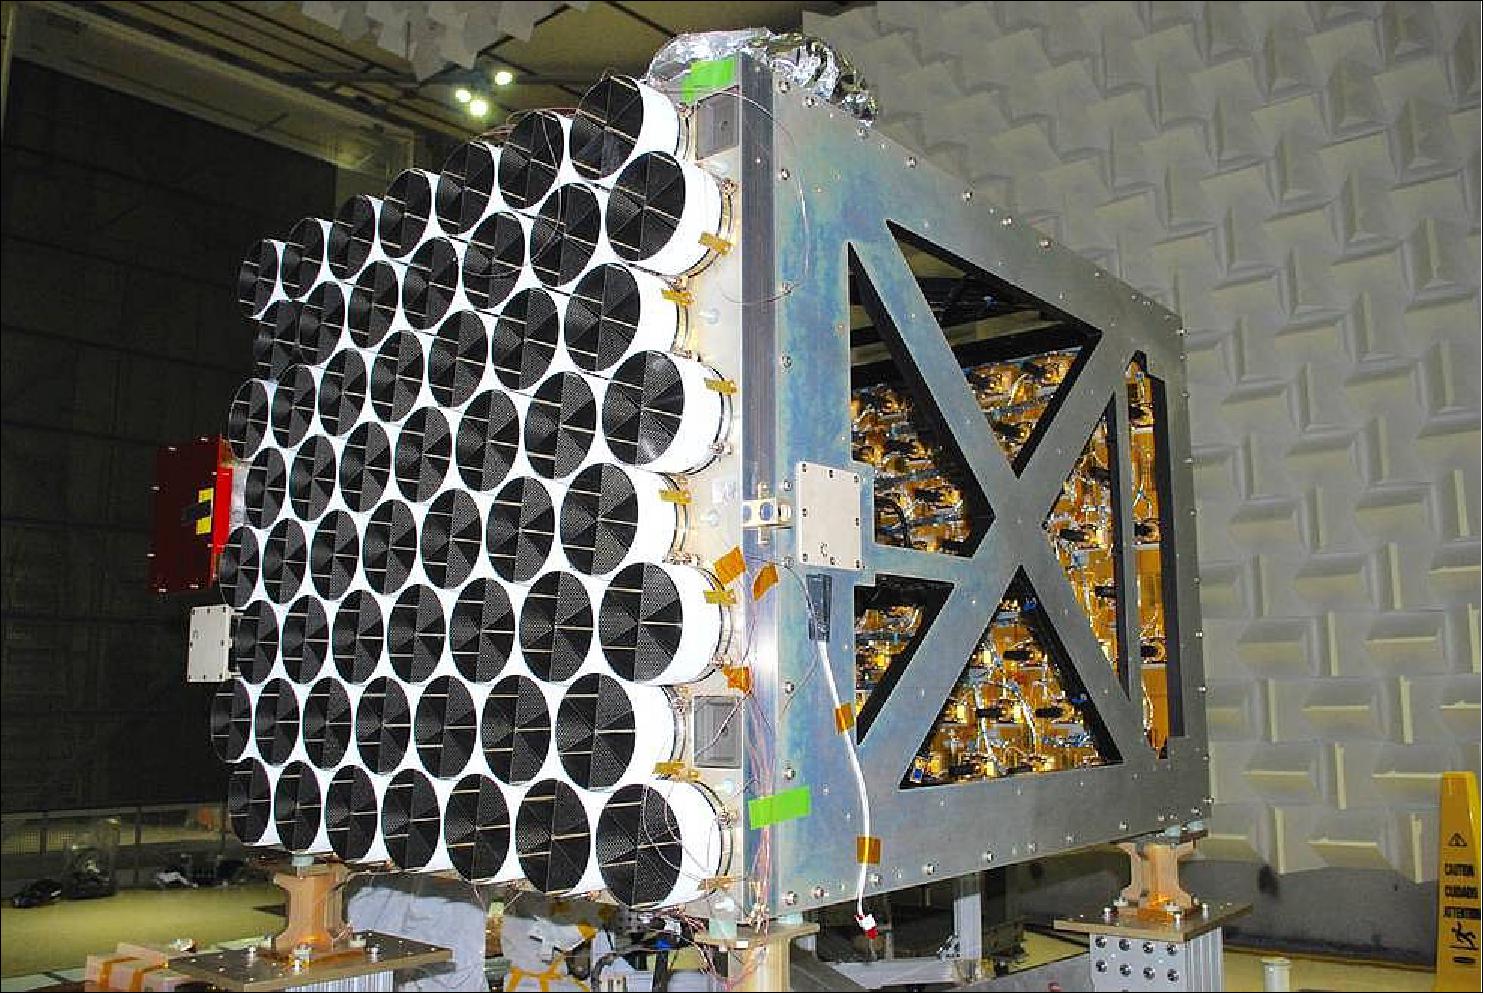 Figure 8: A view of the NICER XTI (X-ray Timing Instrument) without its protective blanketing shows a collection of 56 close-packed sunshades-the white and black cylinders in the foreground-that protect the X-ray optics (not visible here), as well as some of the 56 X-ray detector enclosures, on the gold-colored plate, onto which X-rays from the sky are focused (image credit: NASA, Keith Gendreau)